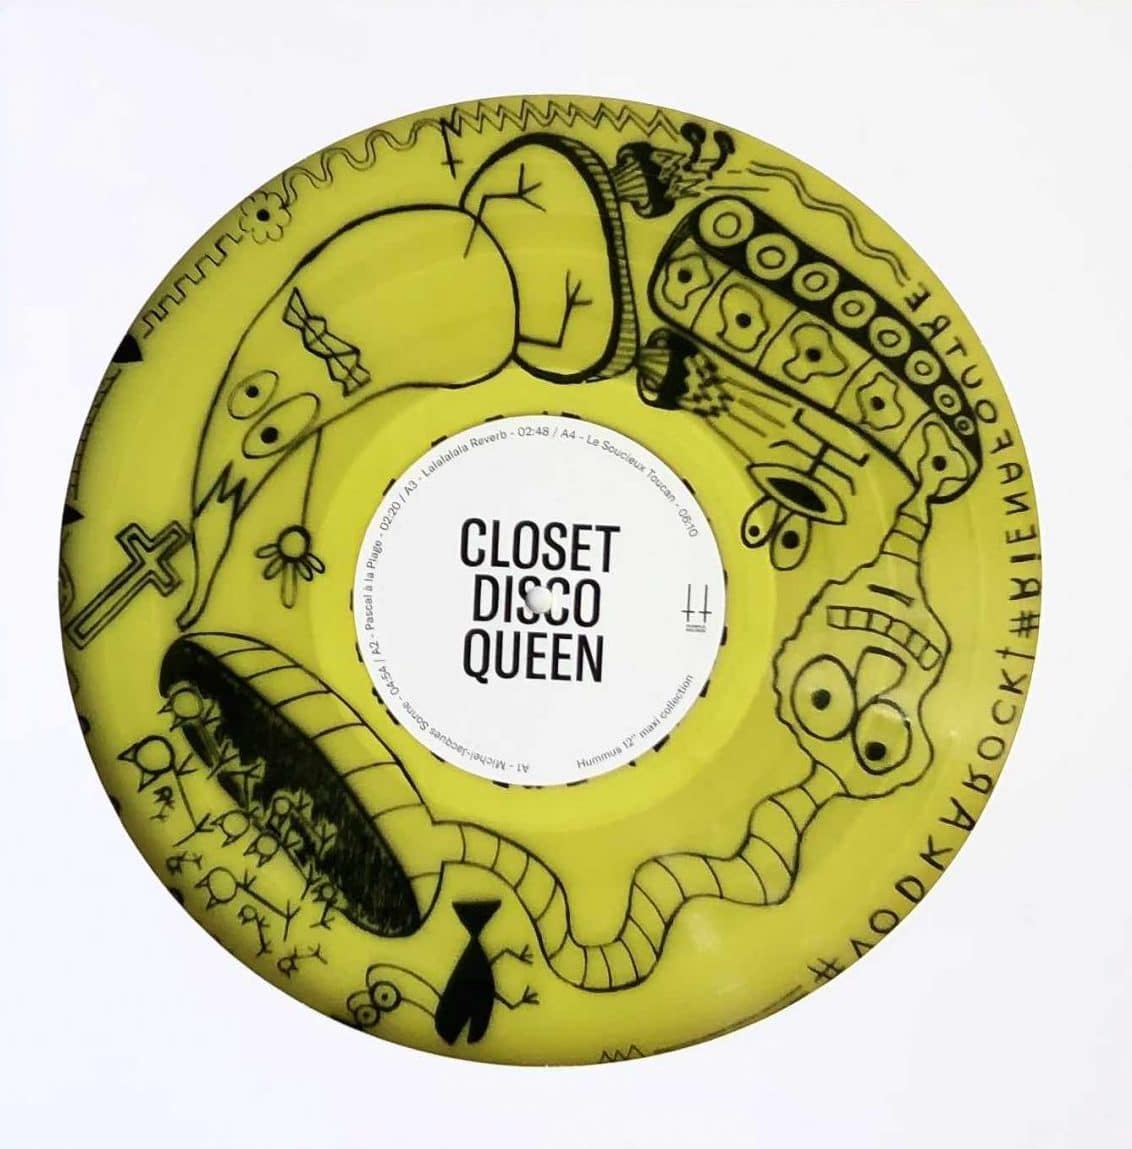 Closet Disco Queen - Stadium Rock for Punk Bums col. 12" (Hummus) silver Wax! comes in a 3mm spine sleeve printed on the reverse side of the board with fully printed inner sleeve